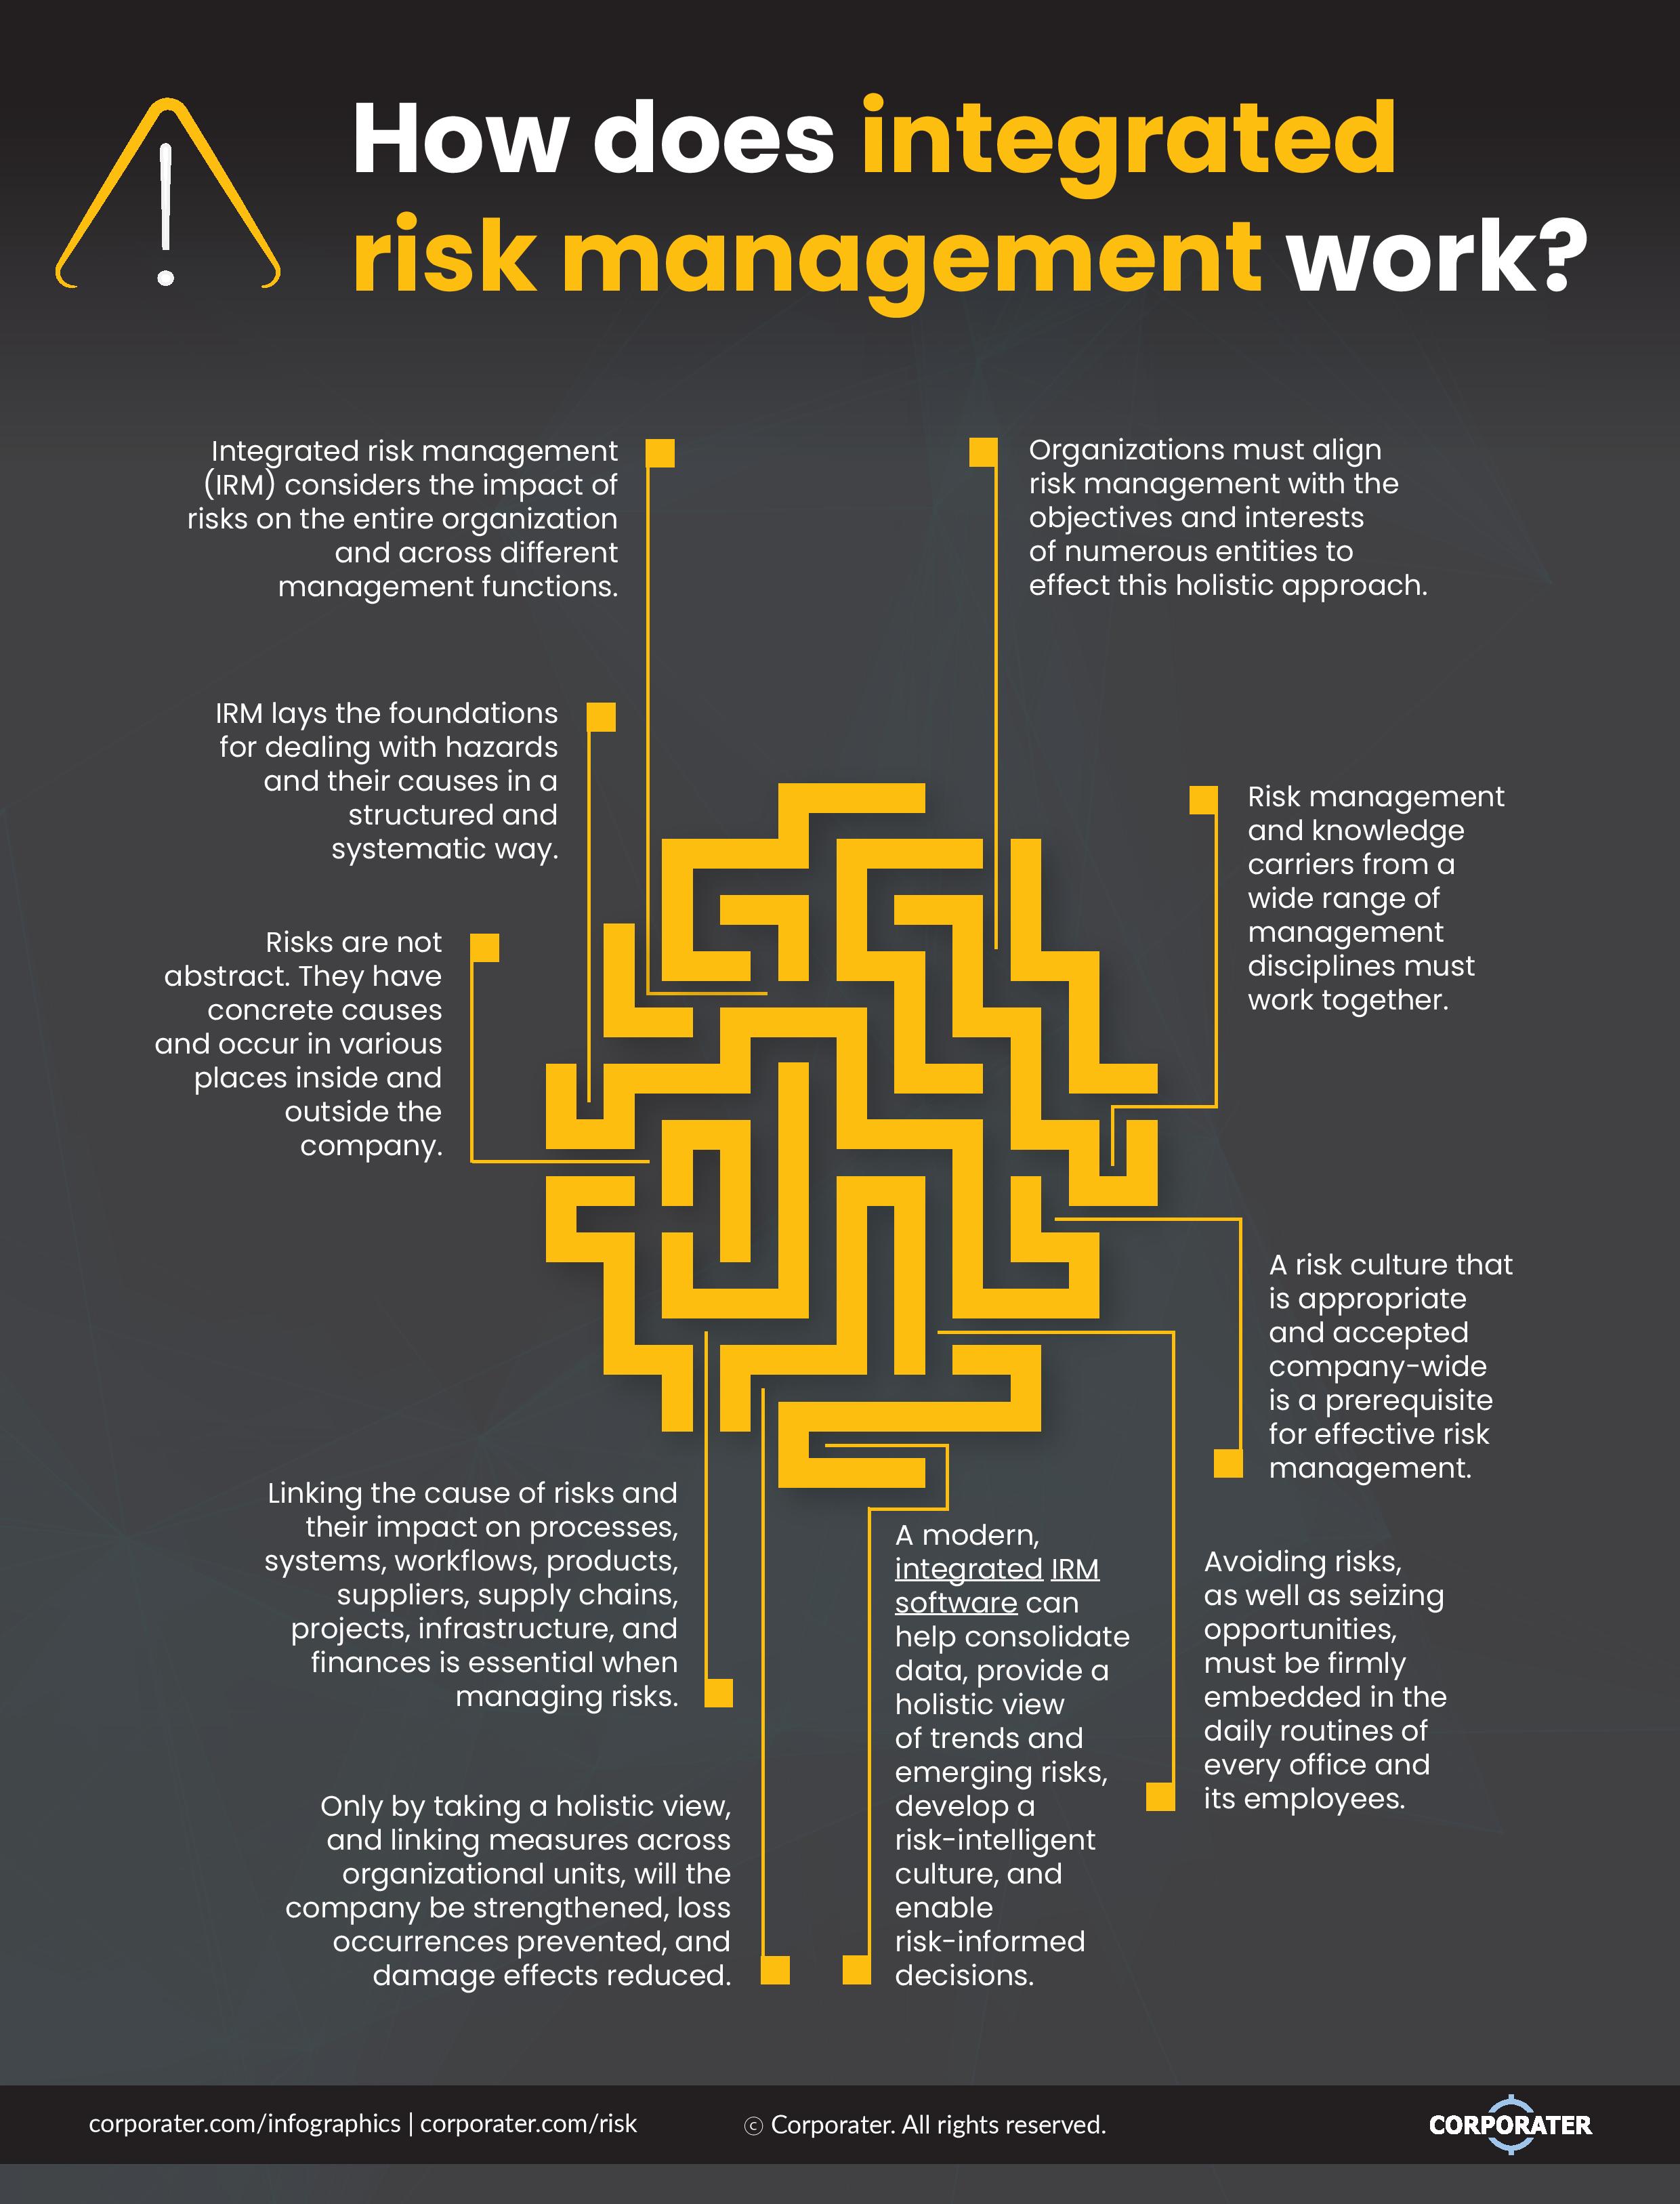 How Does Integrated Risk Management (IRM) Work?